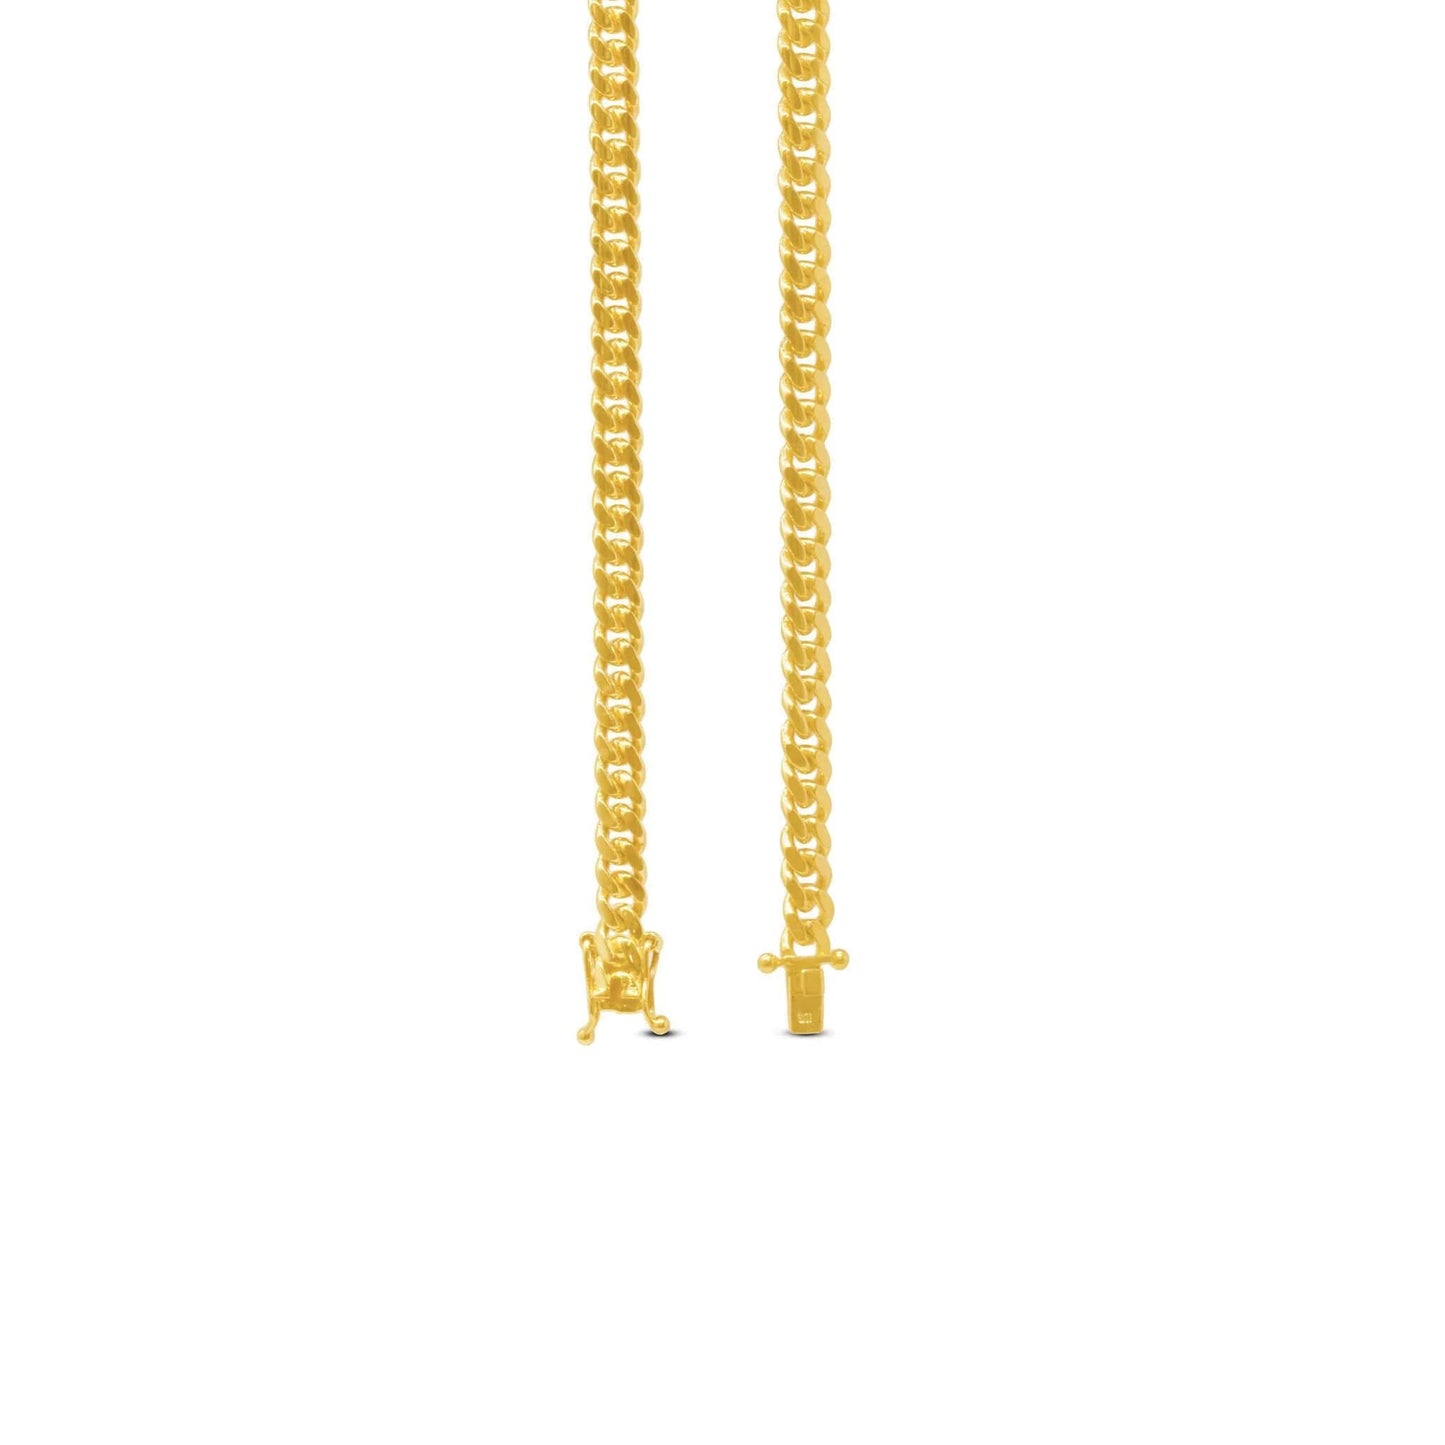 16mm Miami Cuban Link Bracelet in 10K Solid Yellow Gold - Vera Jewelry in Miami